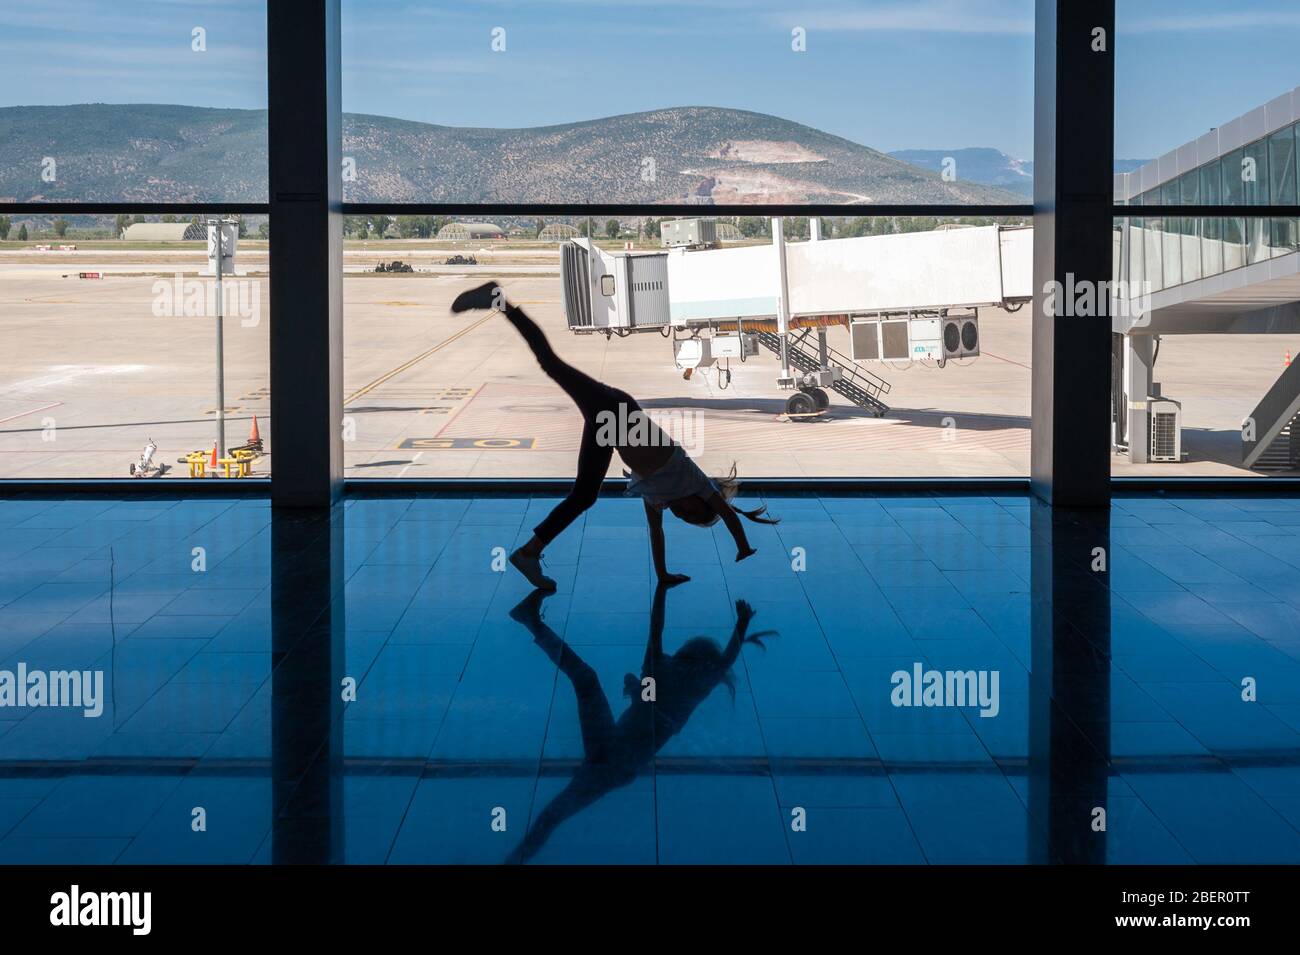 05/26/2019. Bodrum Airport / Milas Mugla Airport. Turkey. Small girl doing cartwheels exercise out of boredom while awaiting for her flight. Stock Photo